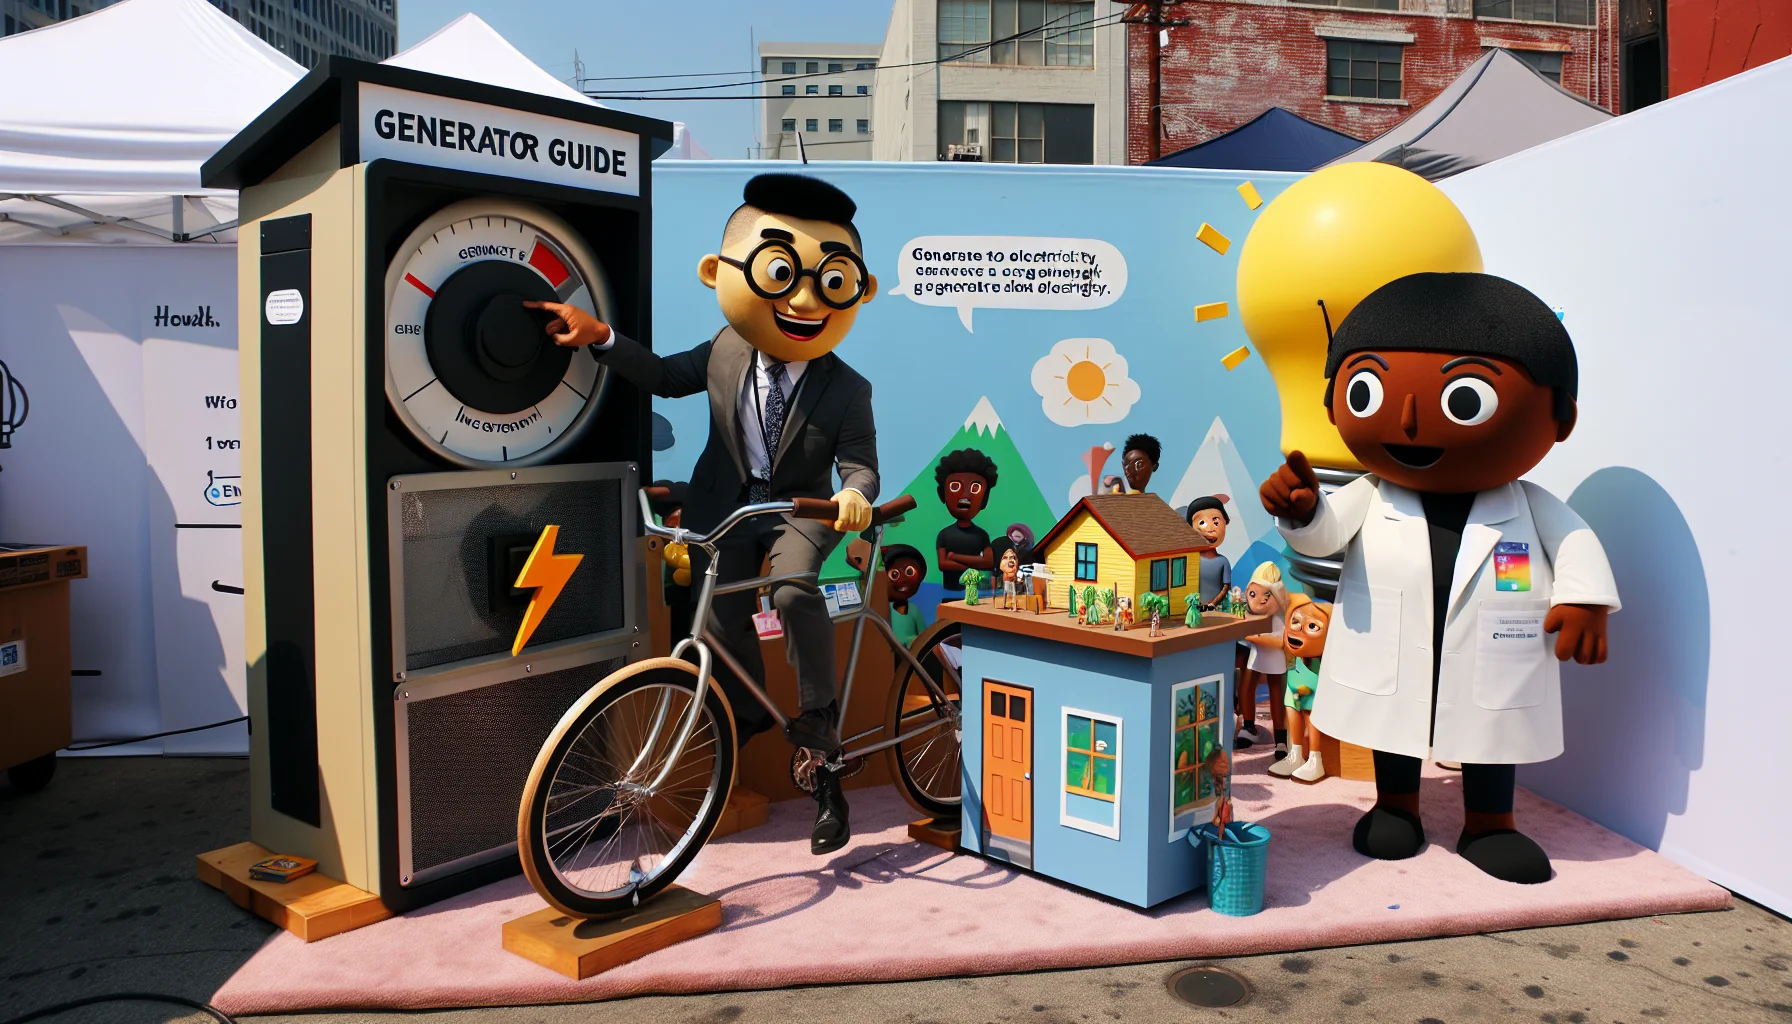 Design a humorous setting where animated human mascots personifying 'Generator Guides' and 'Insights' are encouraging people to generate electricity. The scene is set at an outdoor community fair. The Generator Guide, an Asian man with glasses and a suit, is enthusiastically holding an oversized switch connected to a mock-up of a sustainable home powered by a bike generator. Next to him, the Insight mascot, a Black woman wearing a scientist lab coat and holding a huge light bulb, is explaining the advantages of clean energy to an intrigued audience with people of varied gender and descent. The surrounding is filled with banners containing clever puns about electricity and sustainability. 